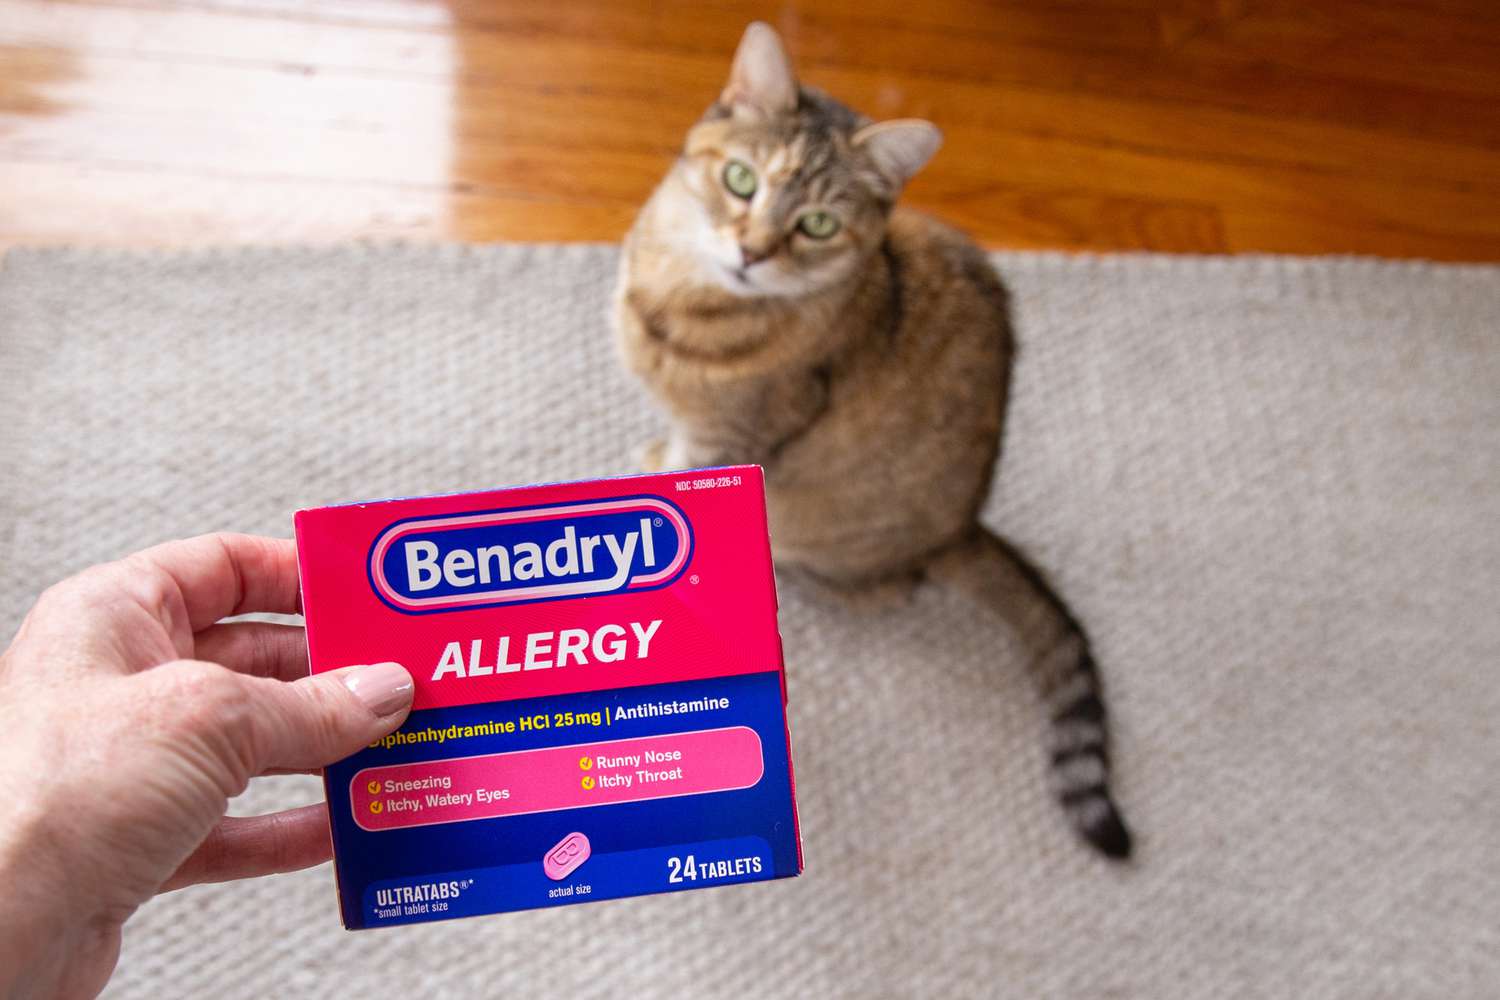 Benadryl allergy box held up in front of brown and white cat sitting on a tan rug